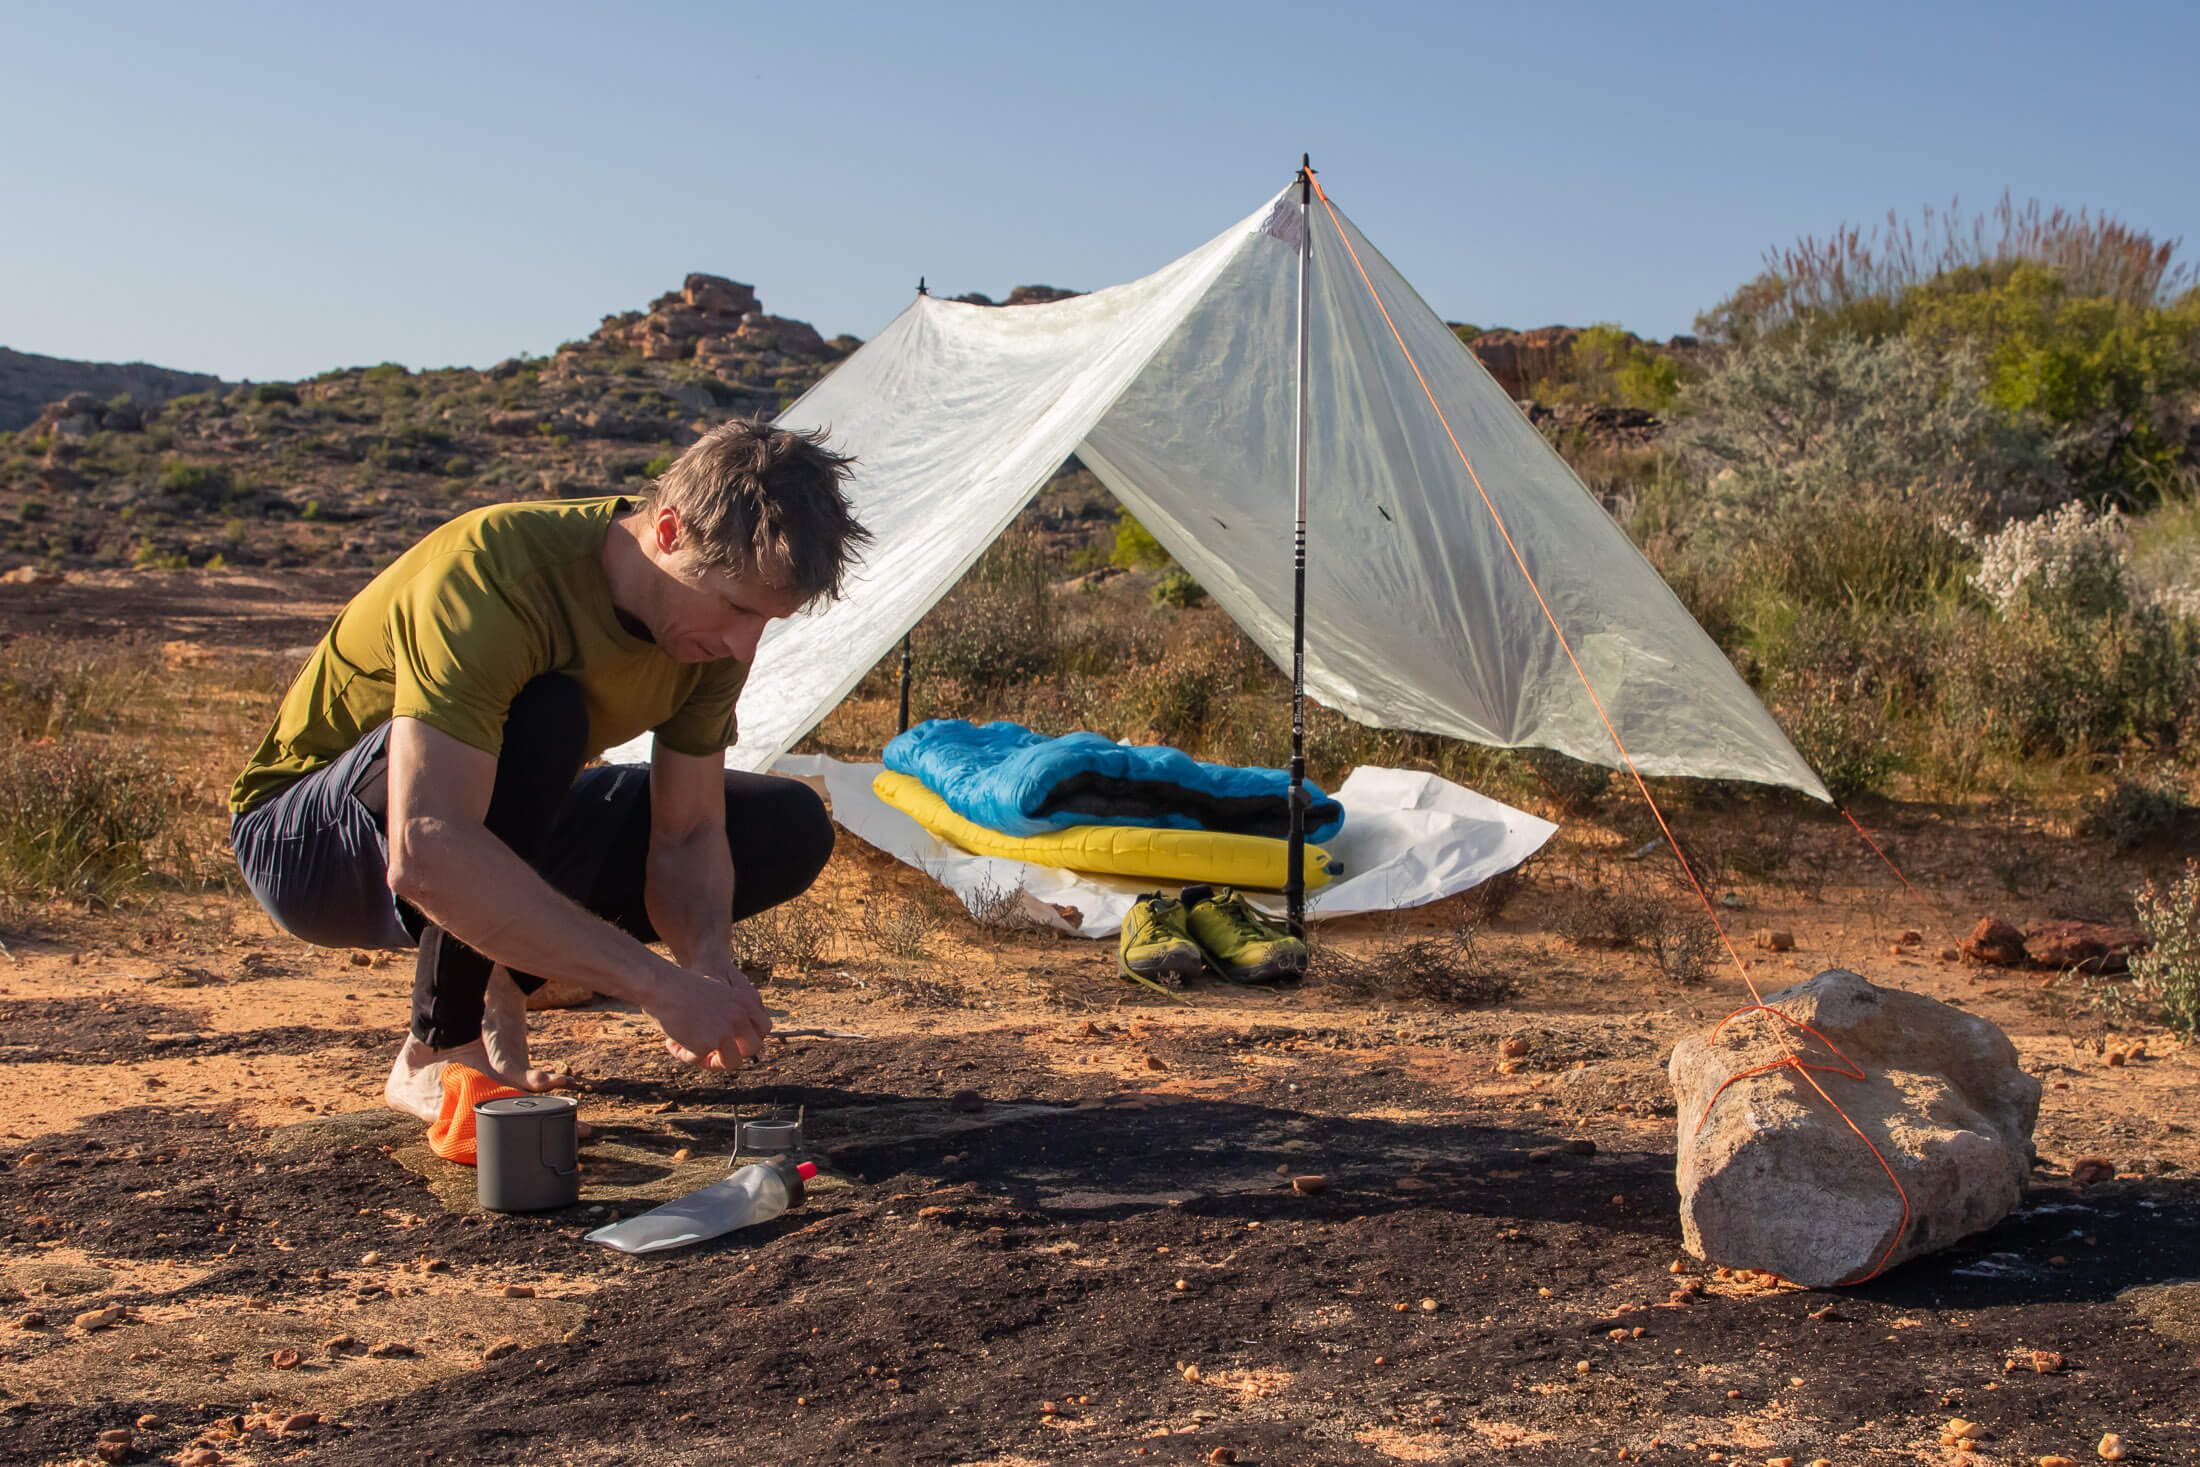 using an alcohol stove while fastpack camping